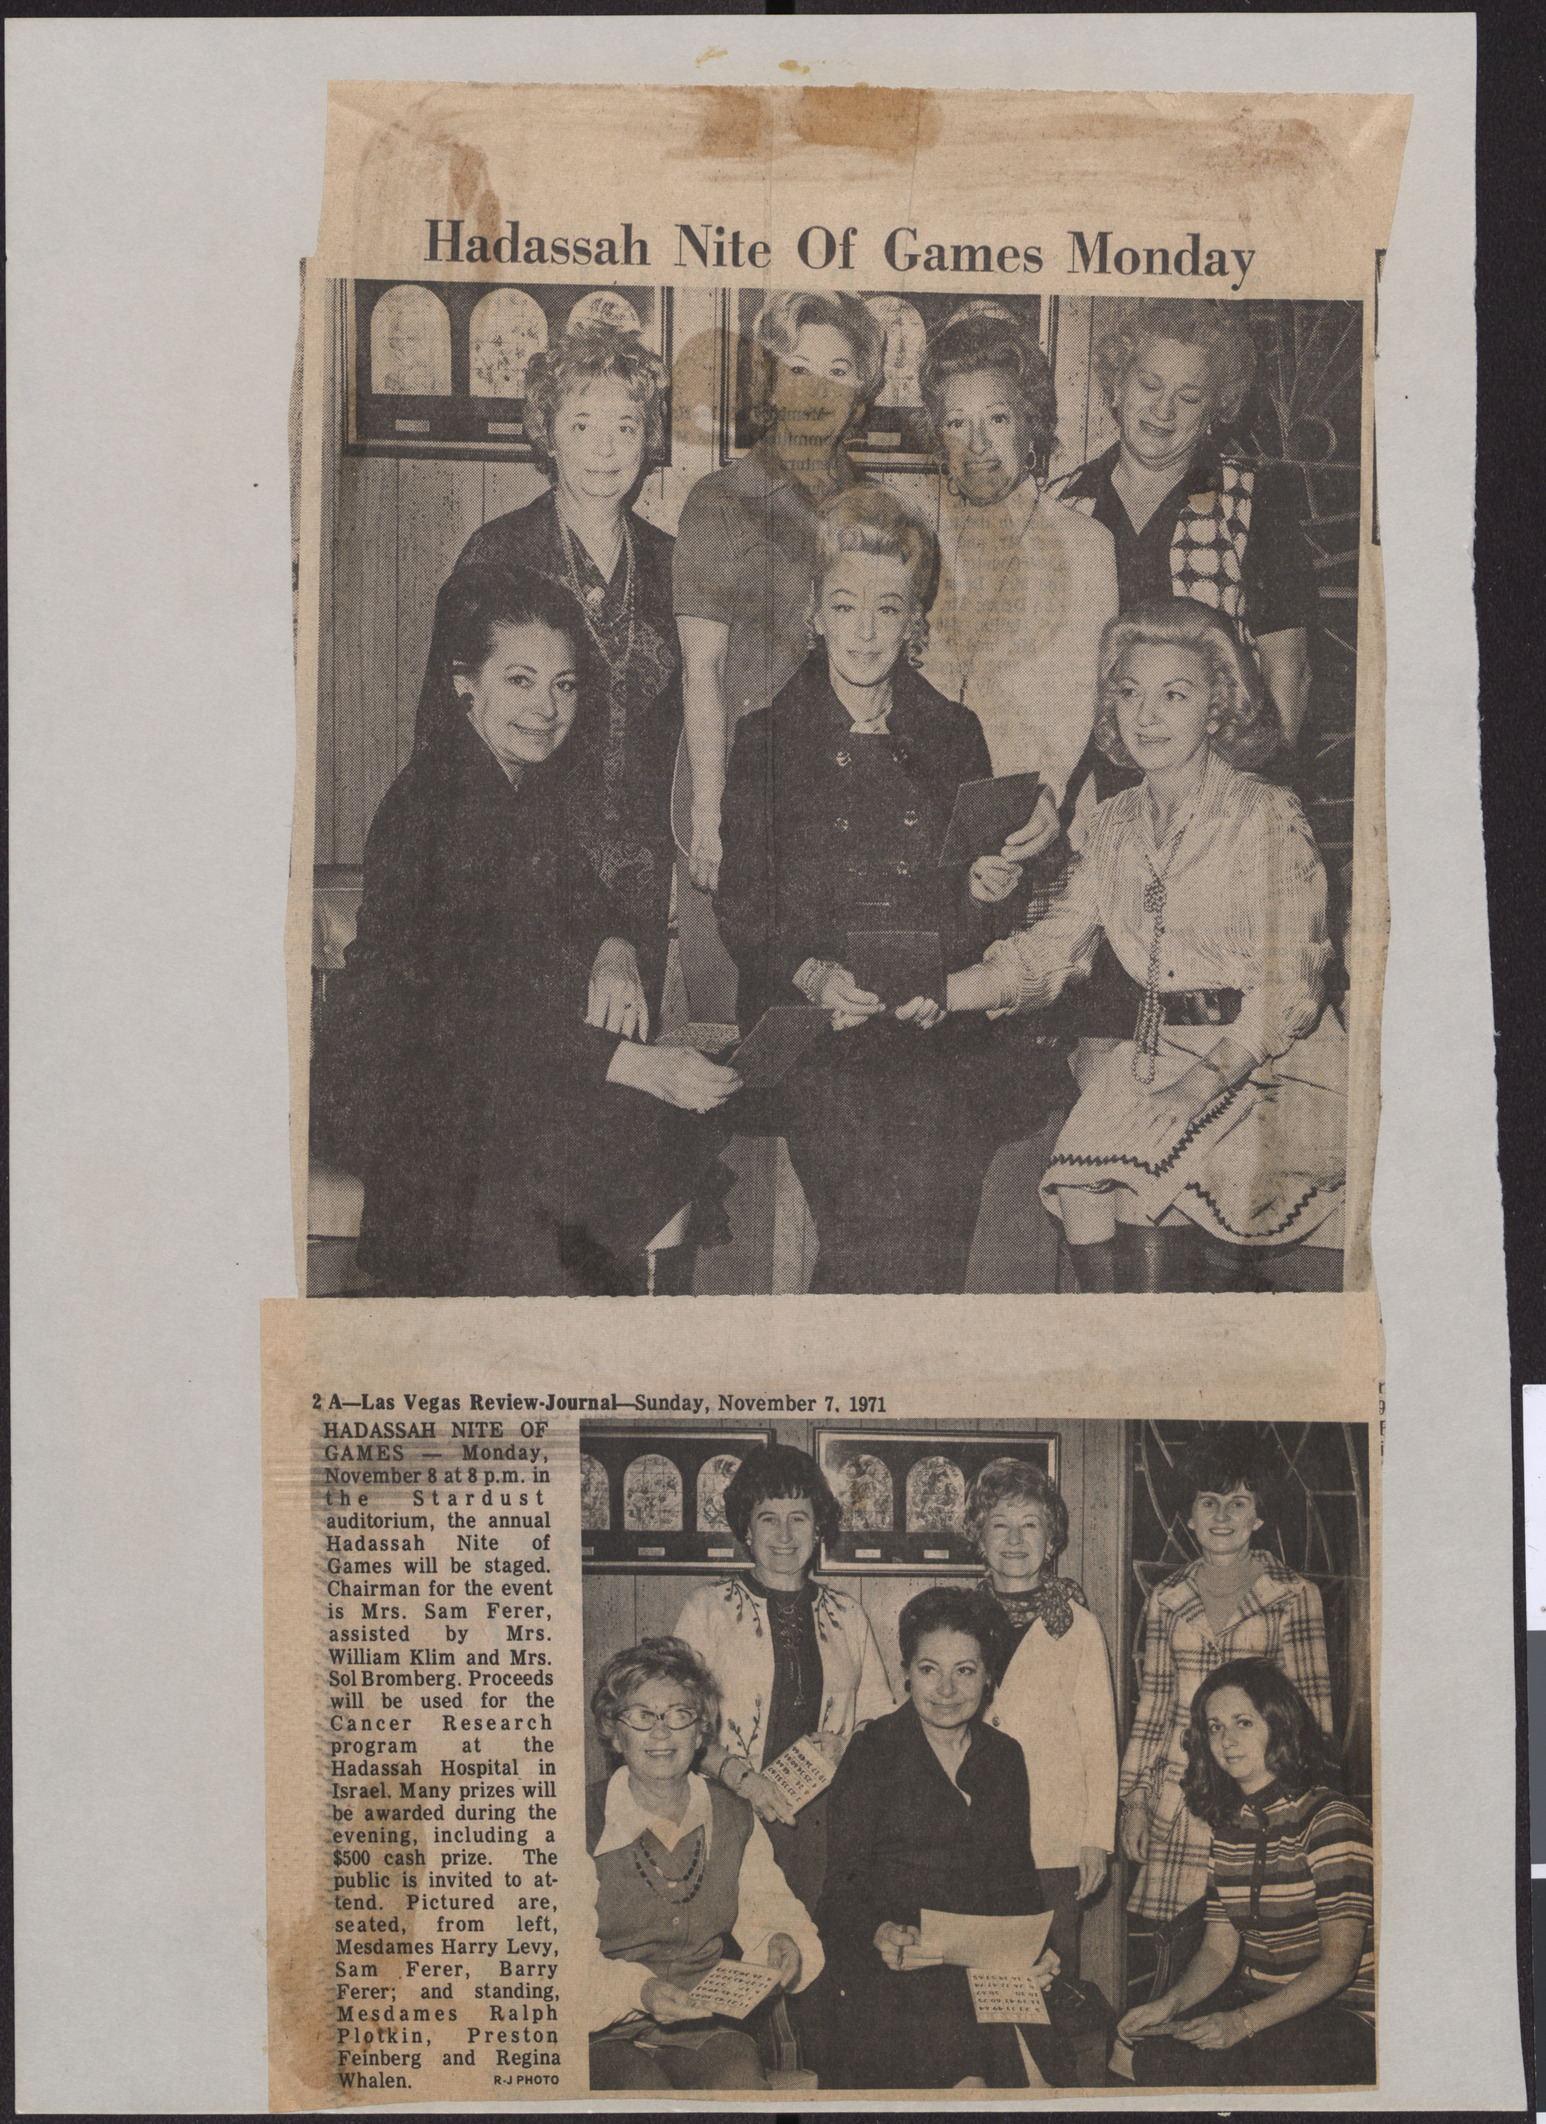 Newspaper clippings about Hadassah game night, November 1971